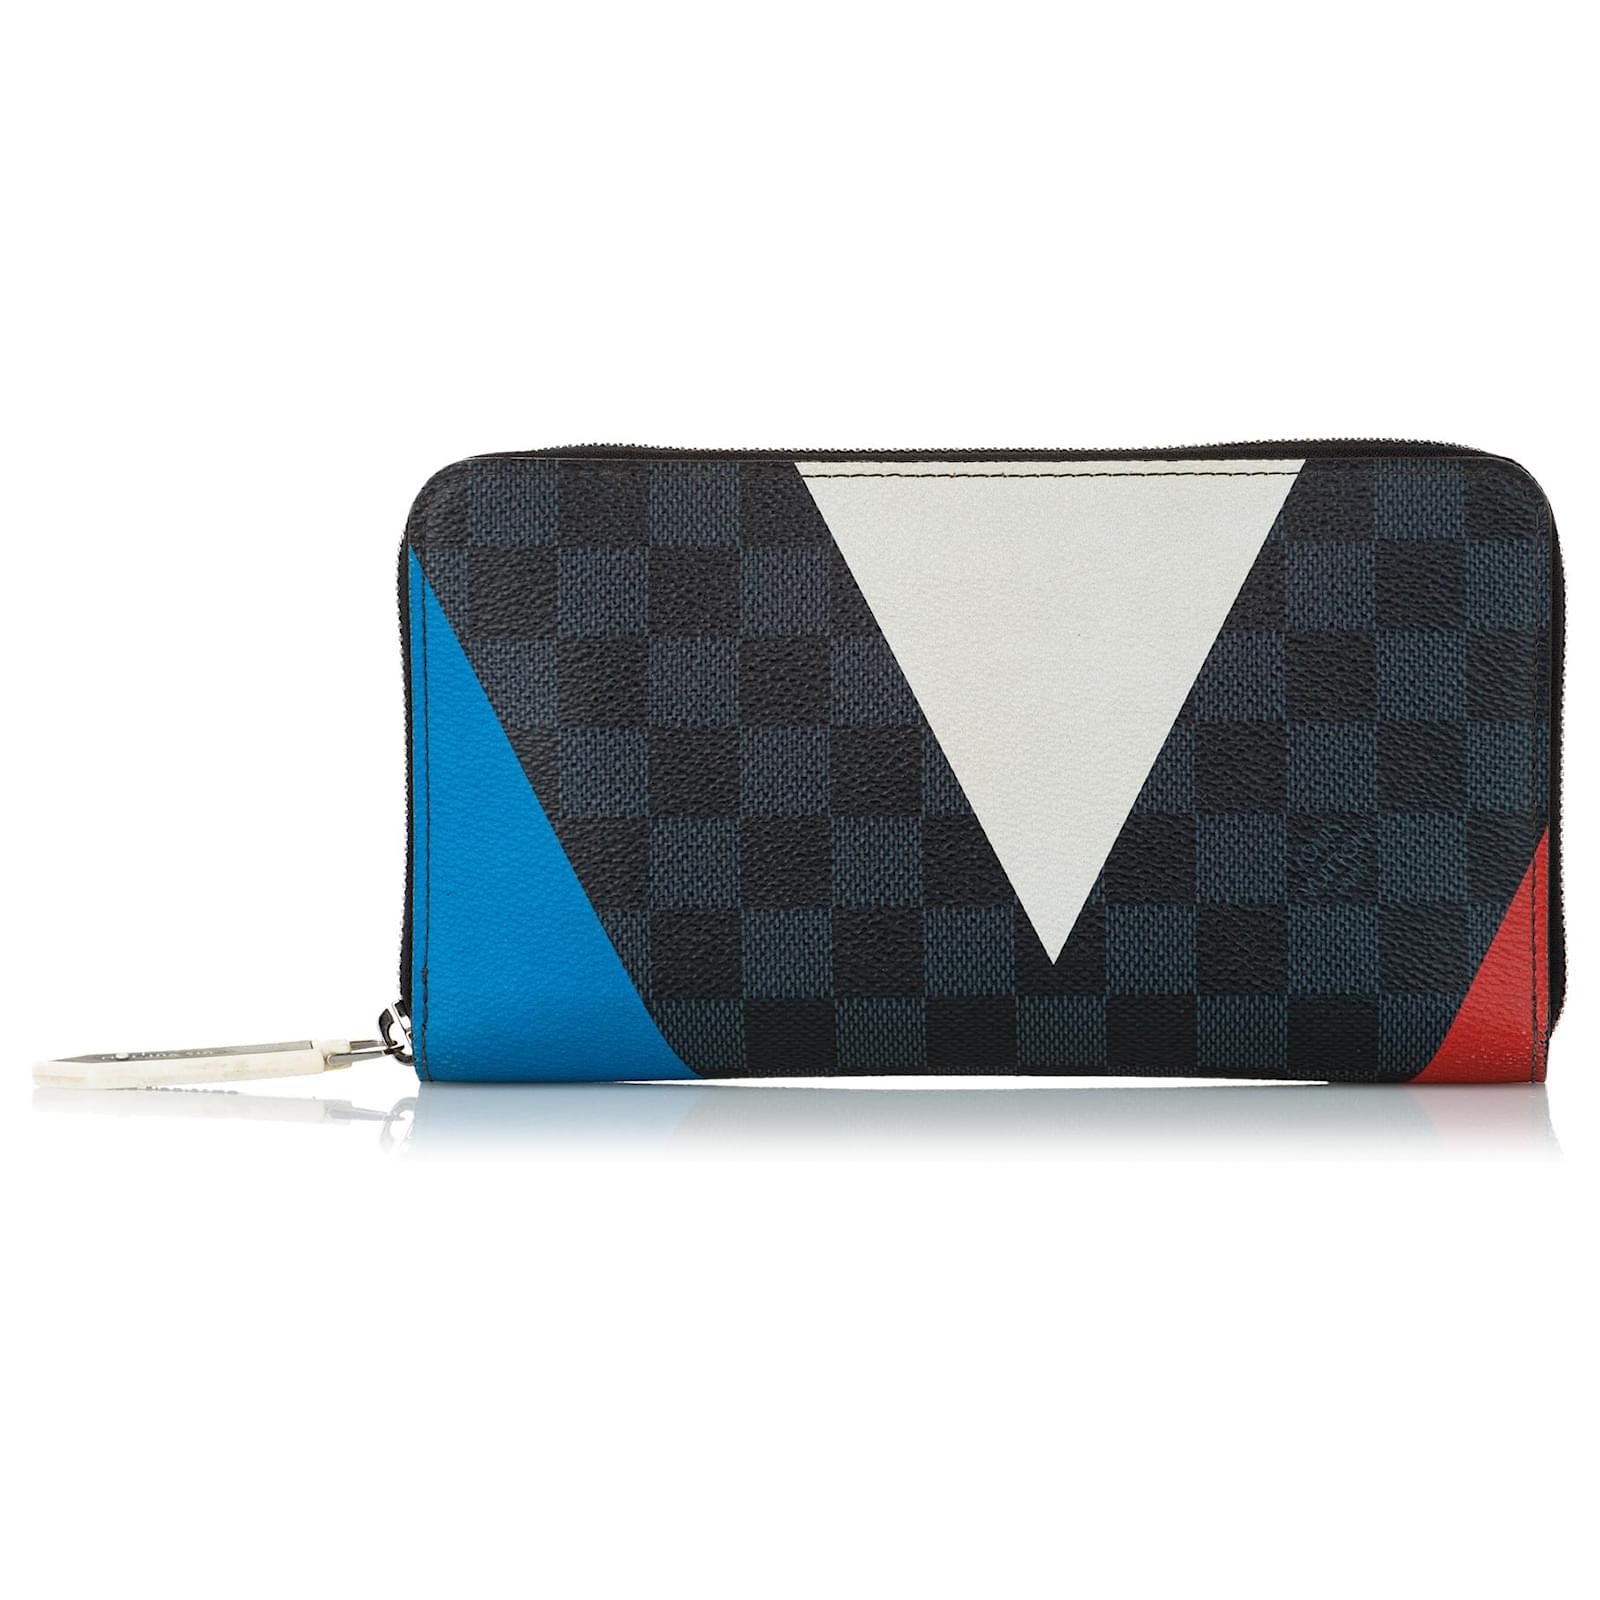 Louis Vuitton Black Damier Blue Wallet for Sale in Queens, NY - OfferUp